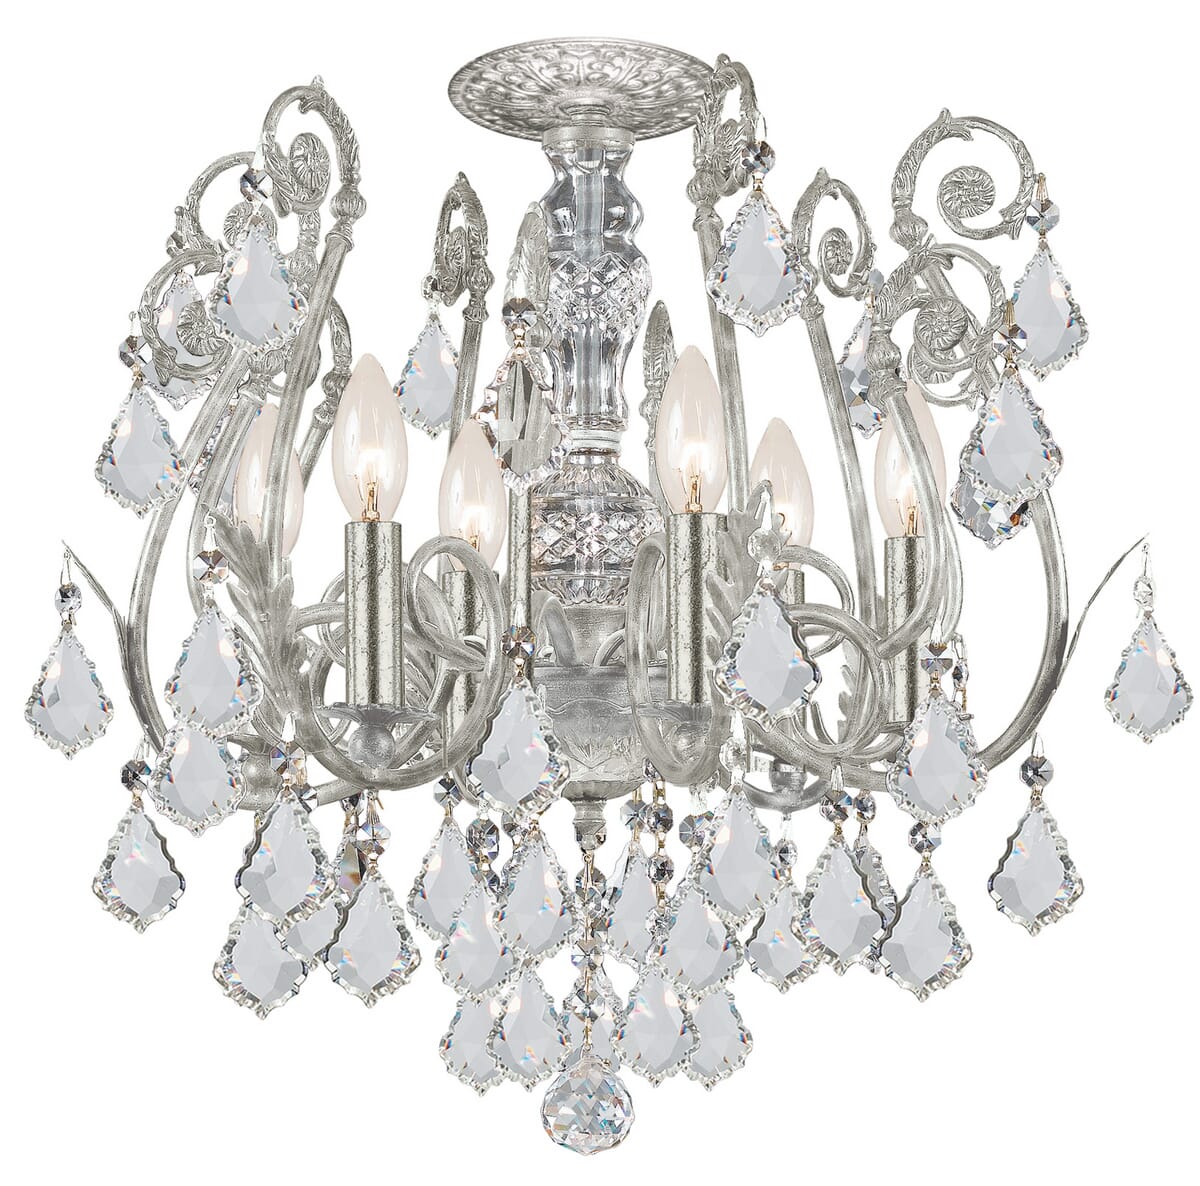 Regis 6-Light 20"" Ceiling Light in Olde Silver with Clear Spectra Crystals -  Crystorama, 5115-OS-CL-SAQ